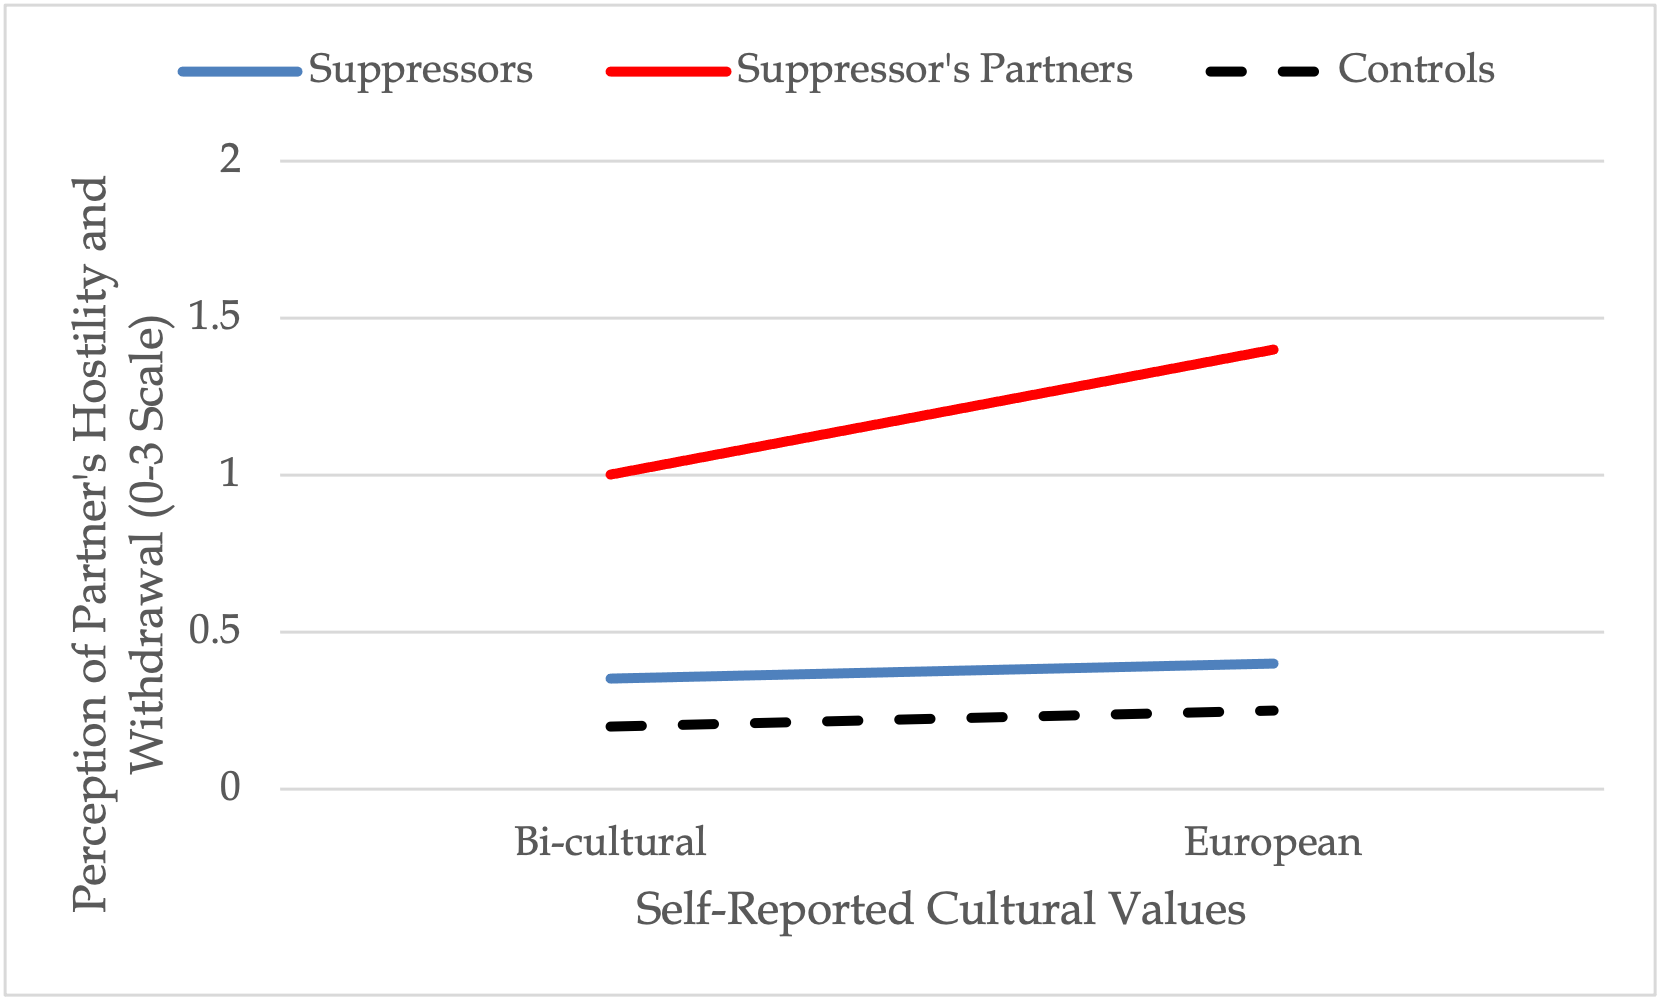 Three lines on a graph. a red line for Supressor's Partners. A blue line for suppressors. A dashed line for controls. The x axis is labeled: self-reported cultural values. The x axis consists of two sections. The left half of the x axis is labeled: Bi-cultural, while the second half is labeled: European. This indicates that as the lines travel across the x axis, they start with data for bi-cultural values, transitioning to european values for the data in the second half of each line. The y axis is labeled: Perception of Partner's Hostility and Withdrawal ( 0 to 3 ) scale. The y axis starts at 0 and is incremented by 0.5 to a maximum of 2.